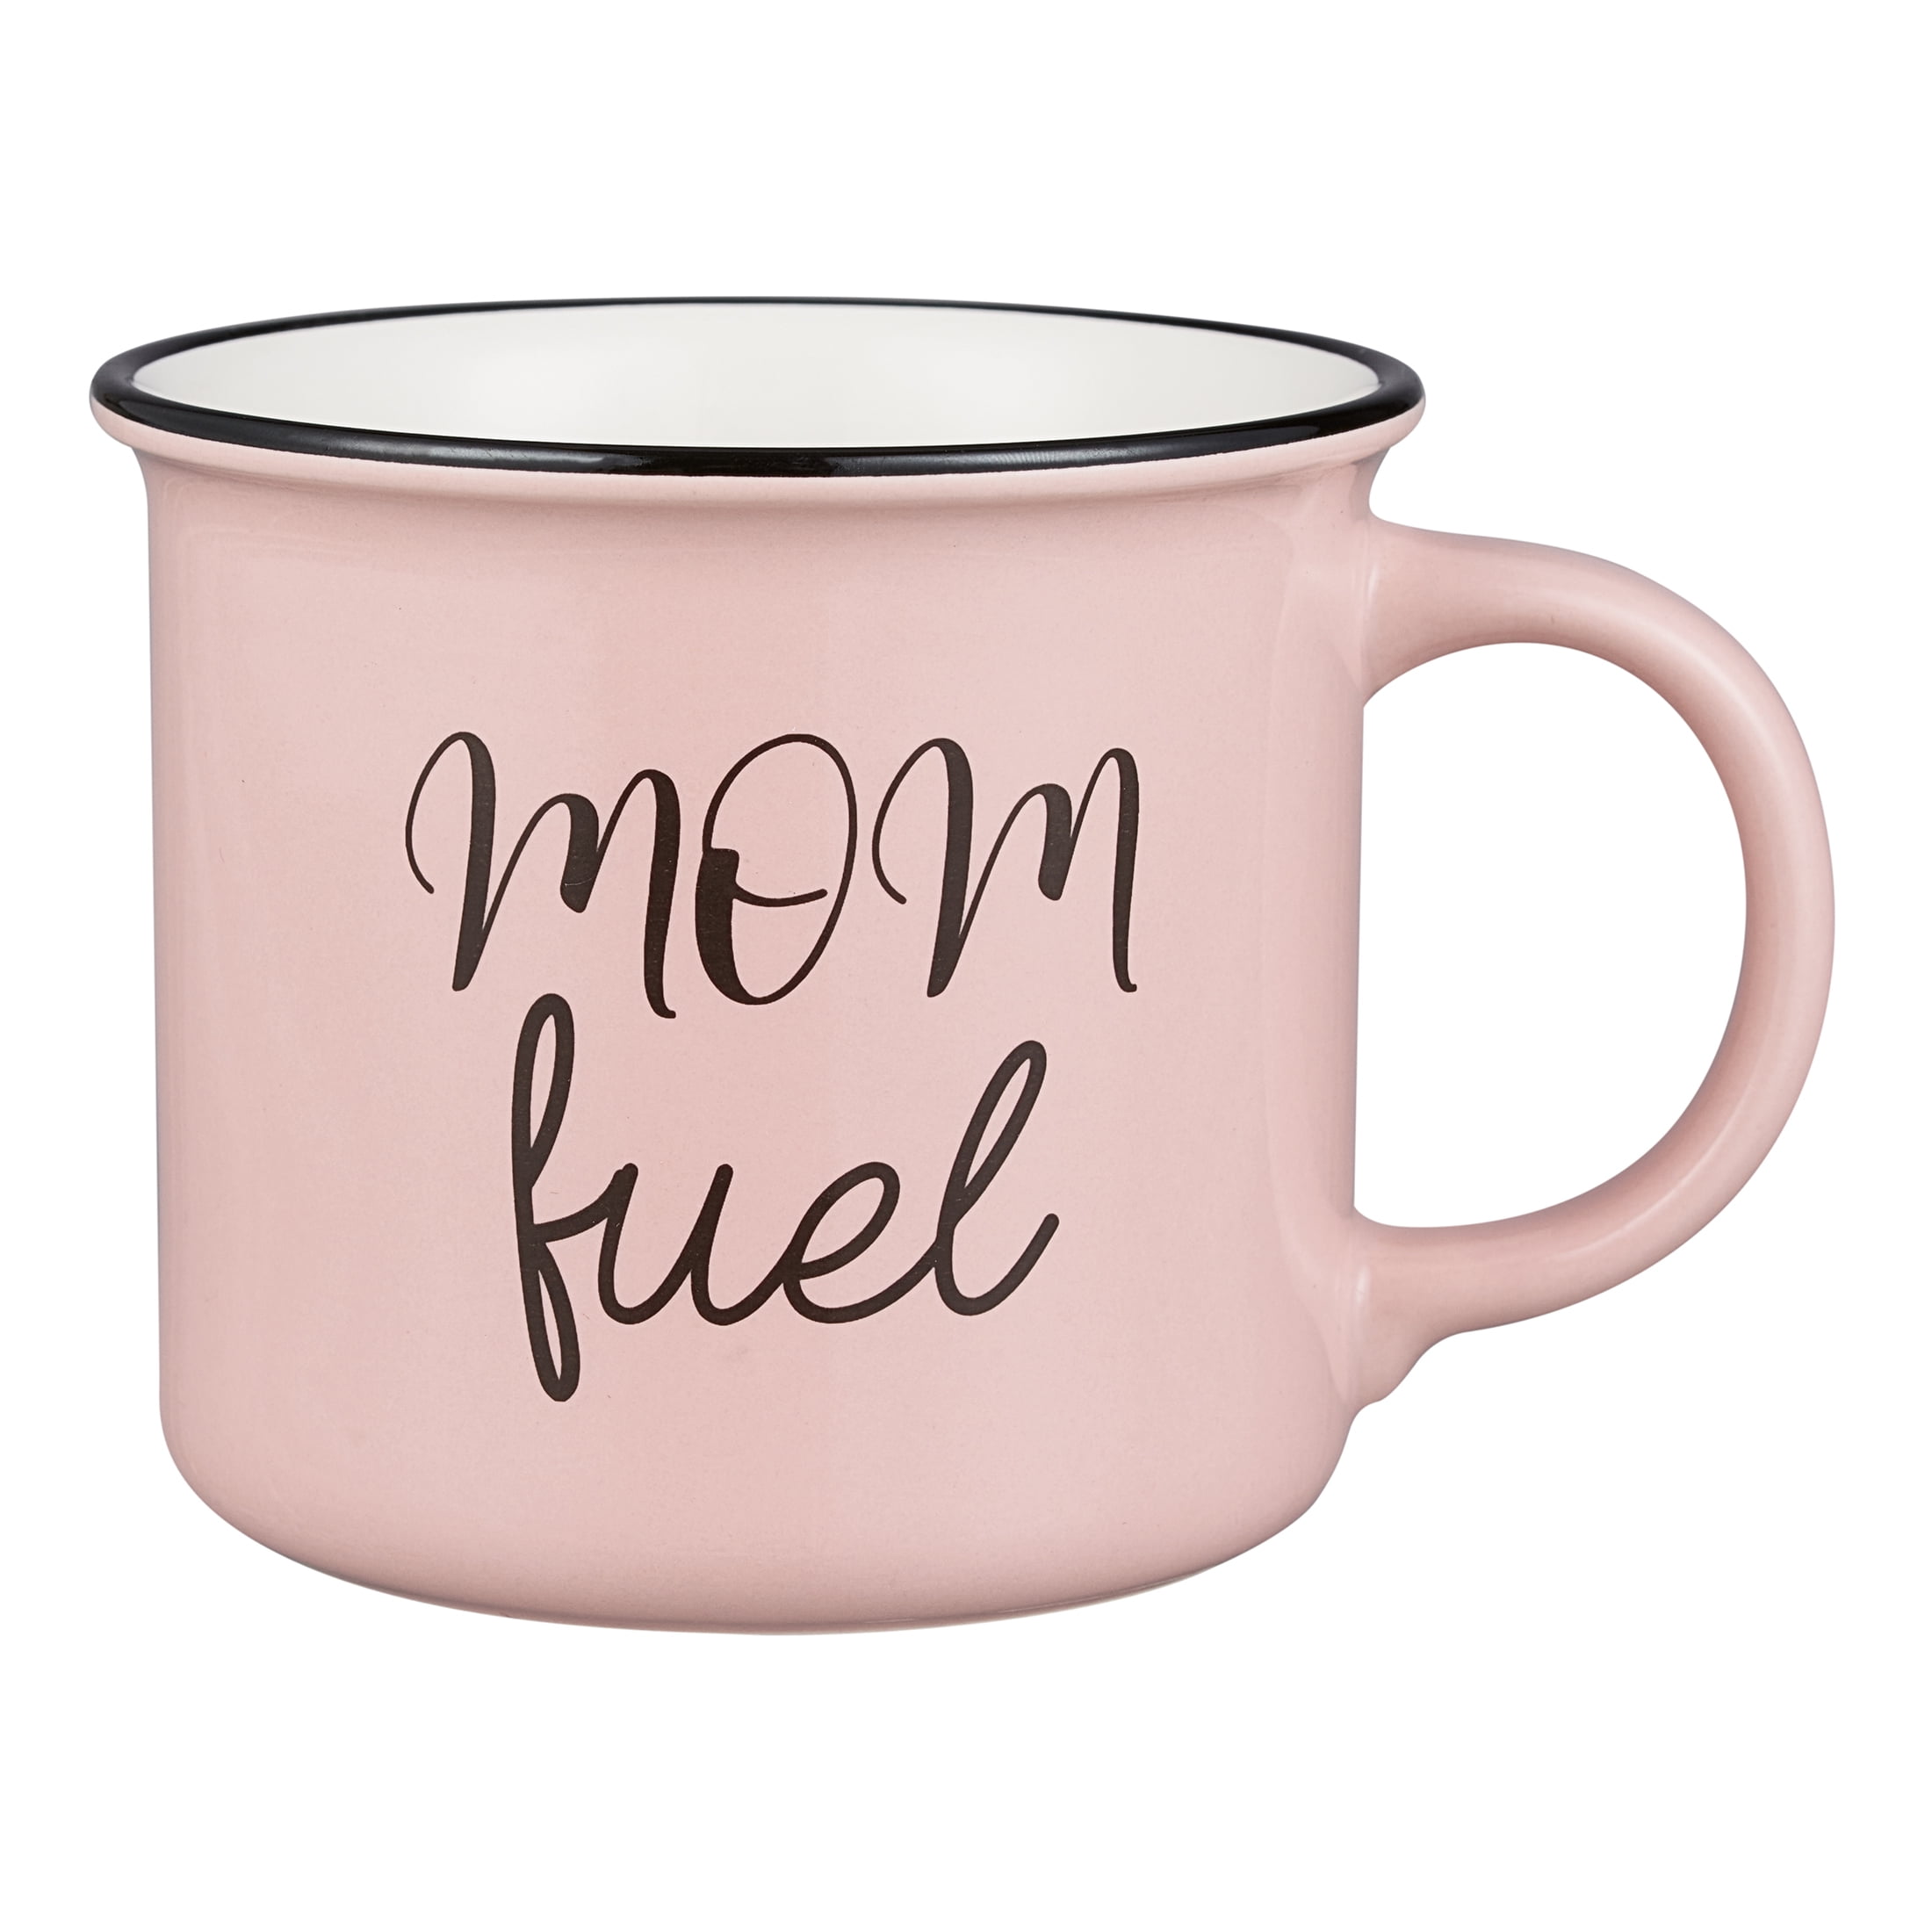 So Glad You're Our Mom Personalized Coffee Mug - 11oz Pink